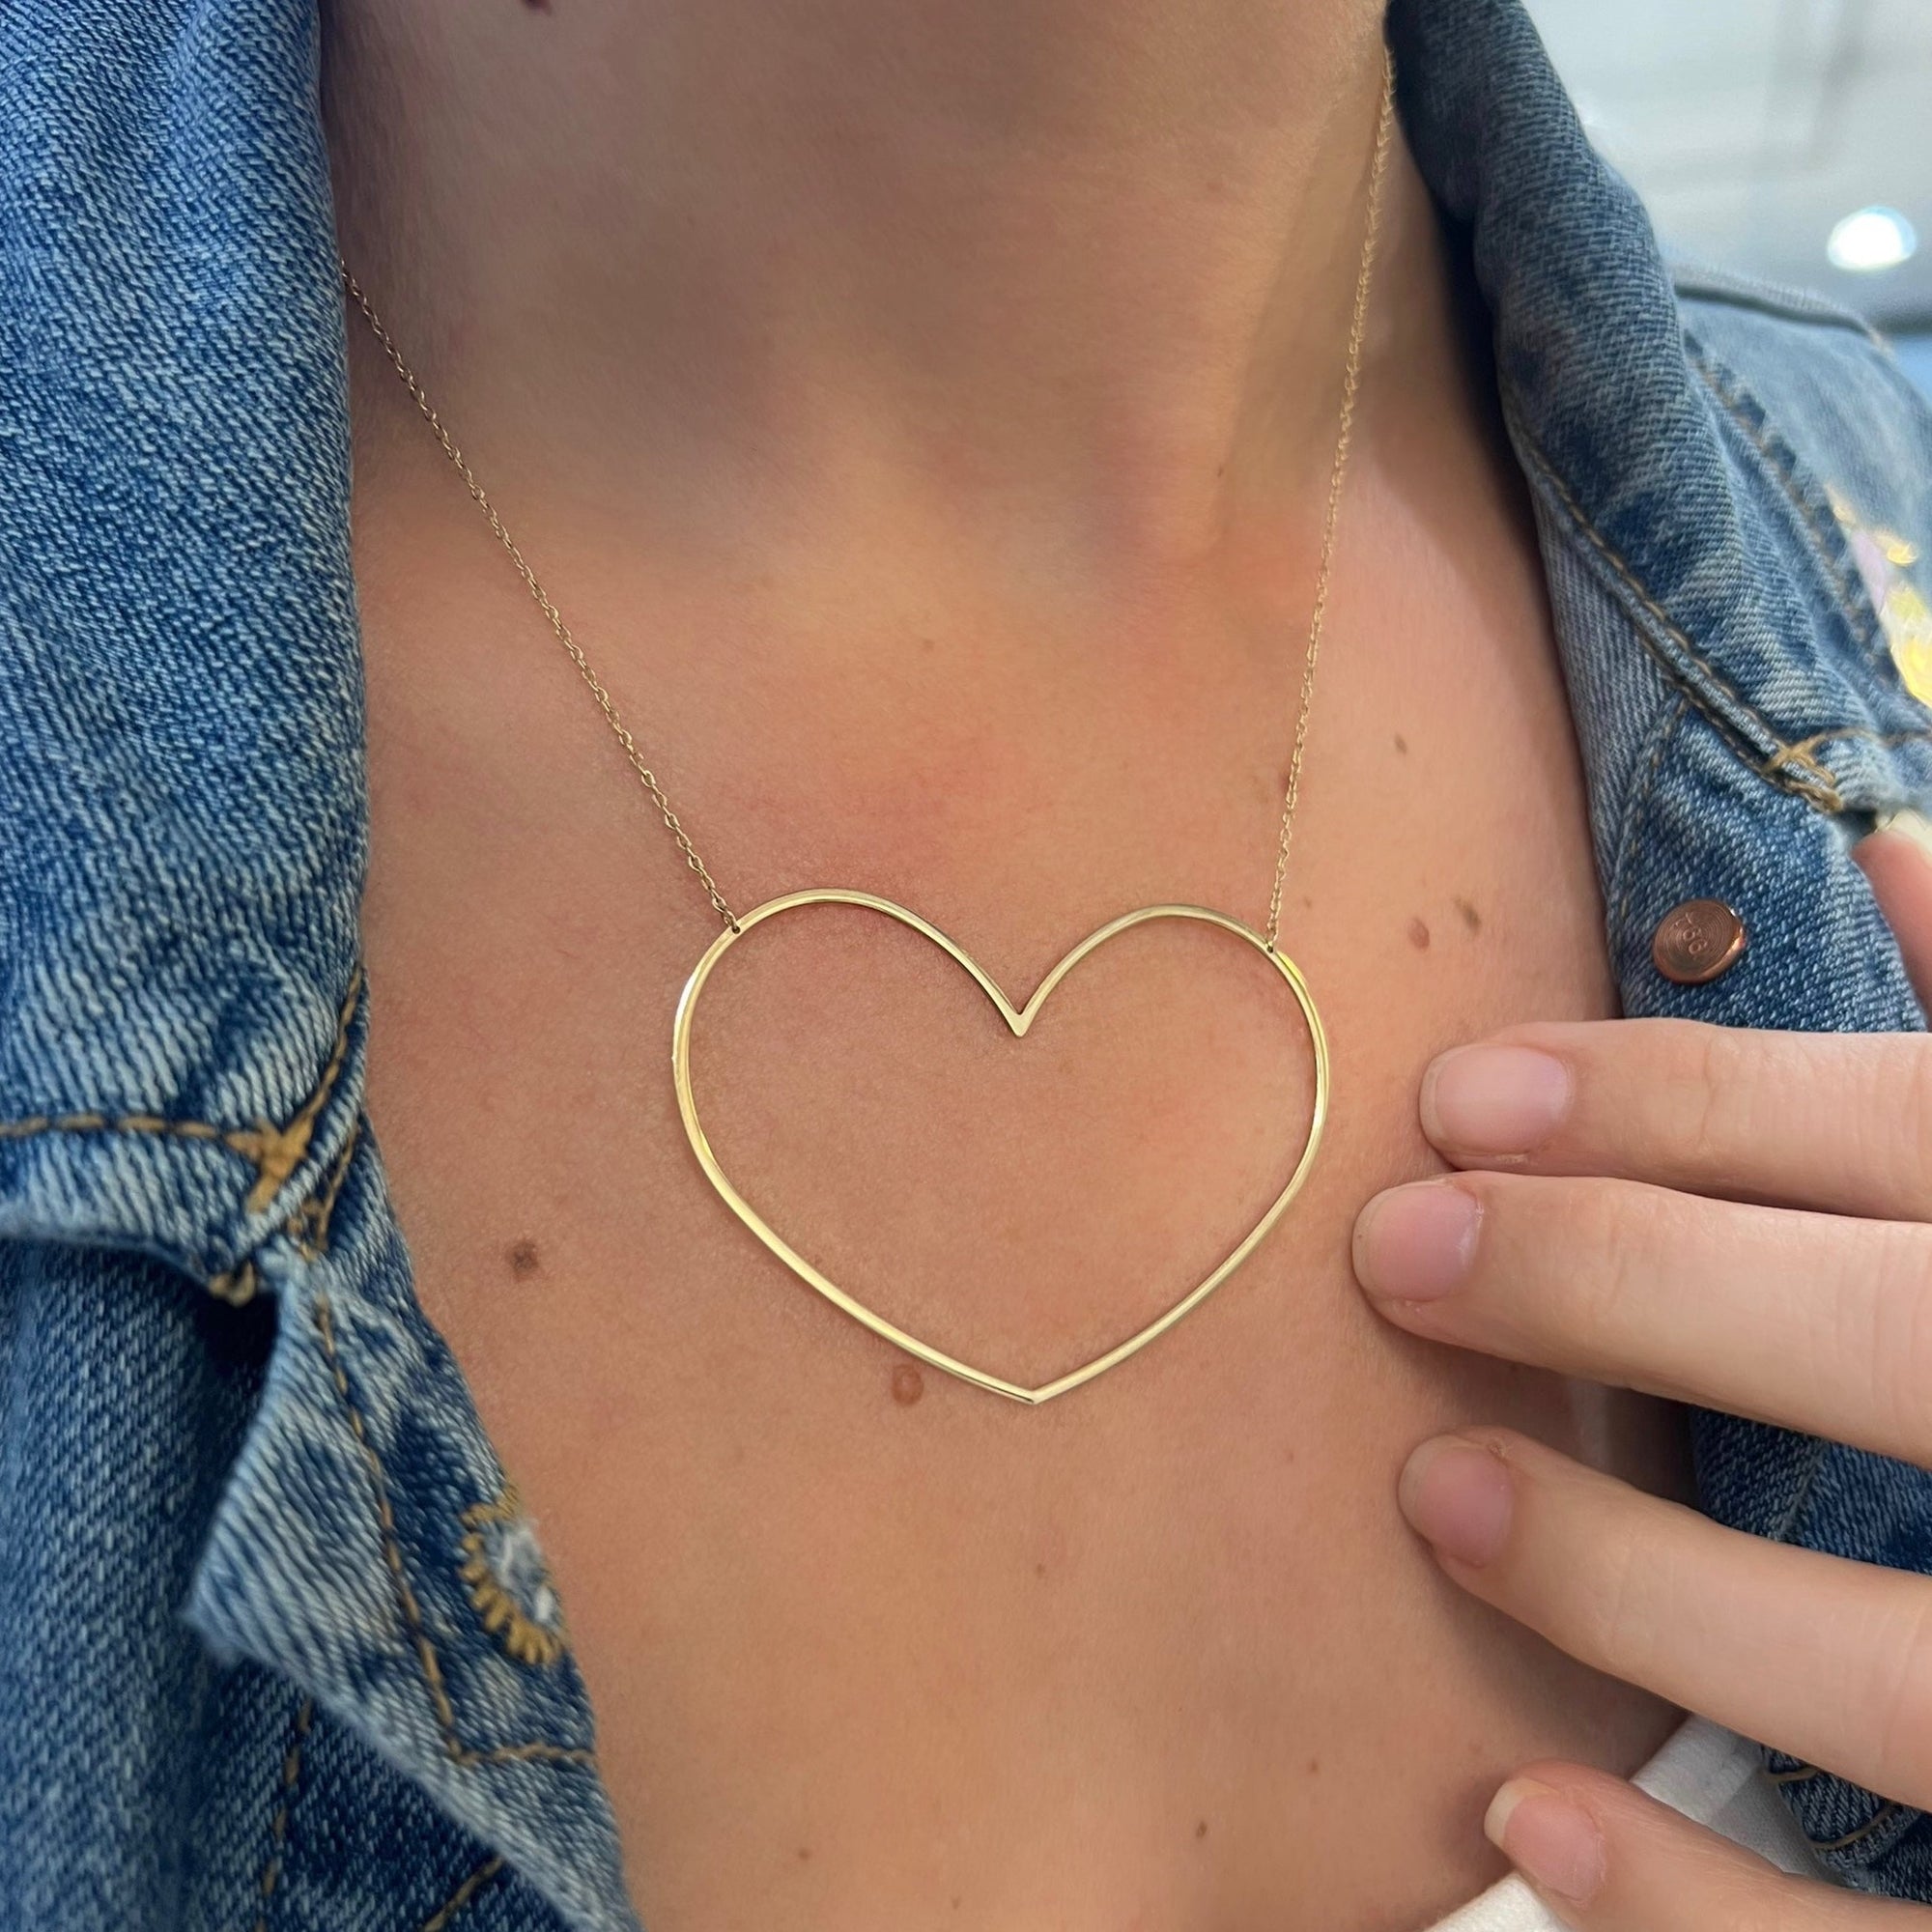 Giant Gold Heart Necklace